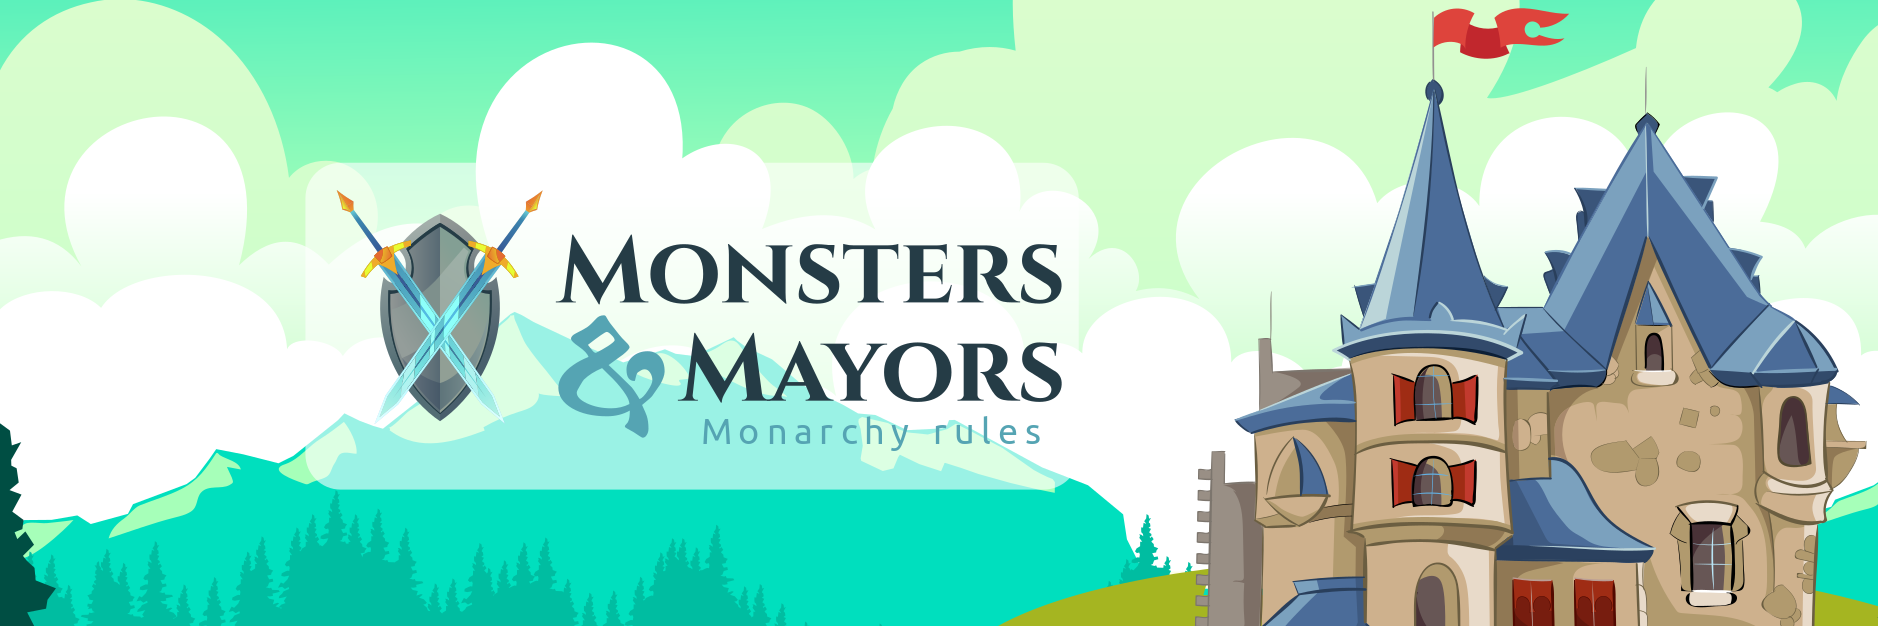 Monsters & Mayors